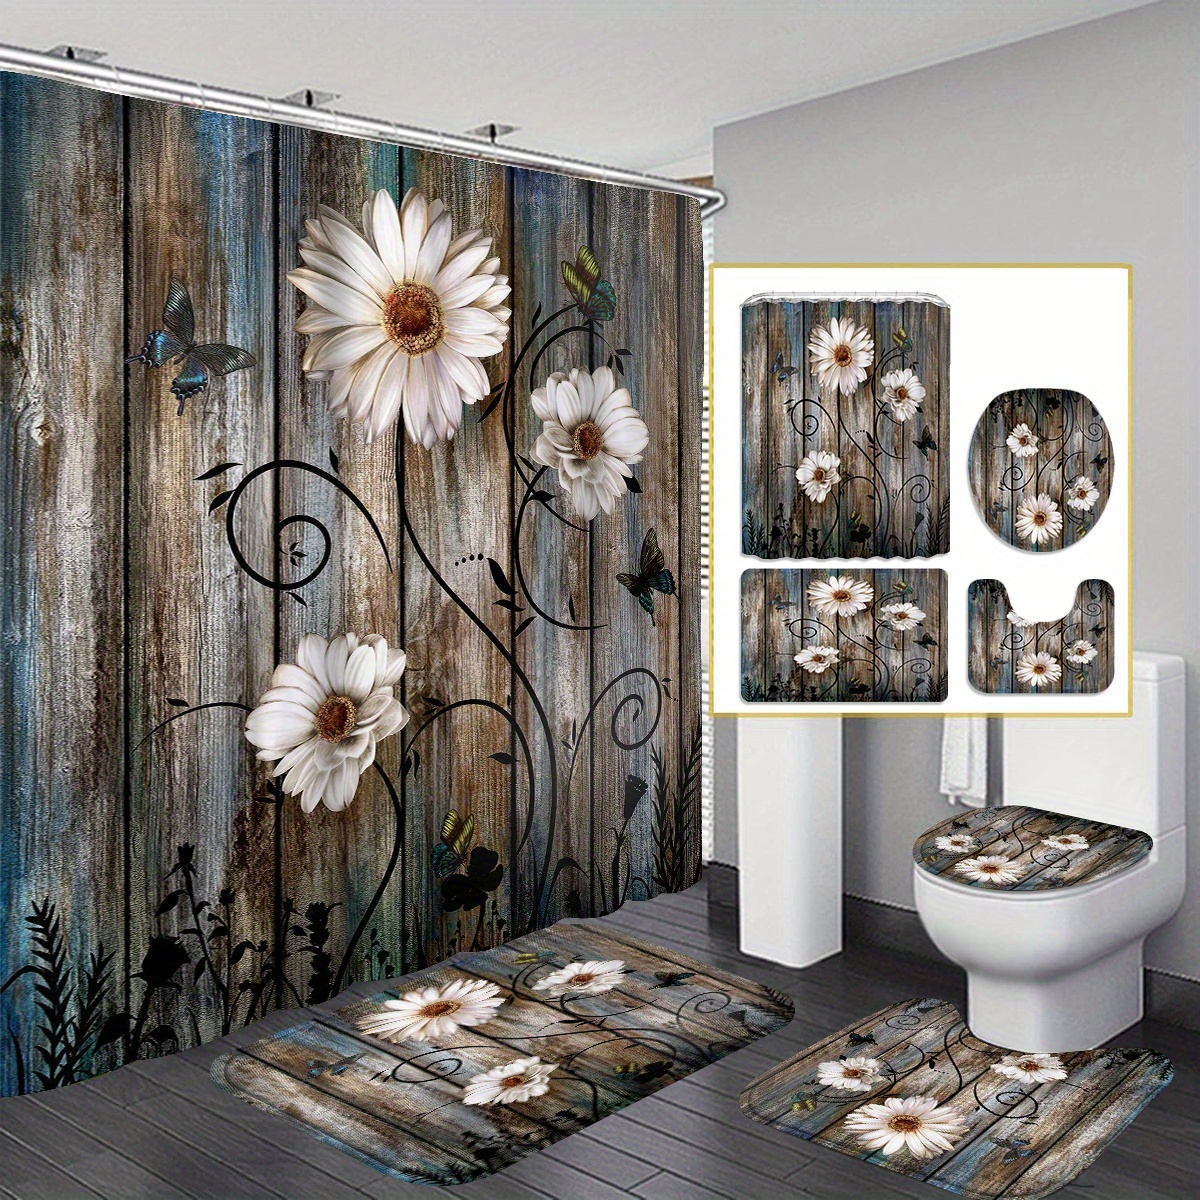 

4pcs Small White Flowers On Wood Grain Shower Curtain Gift Modern Home Bathroom Decoration Curtain And Toilet Floor Mat 3-piece Set With 12 Shower Curtain Hooks